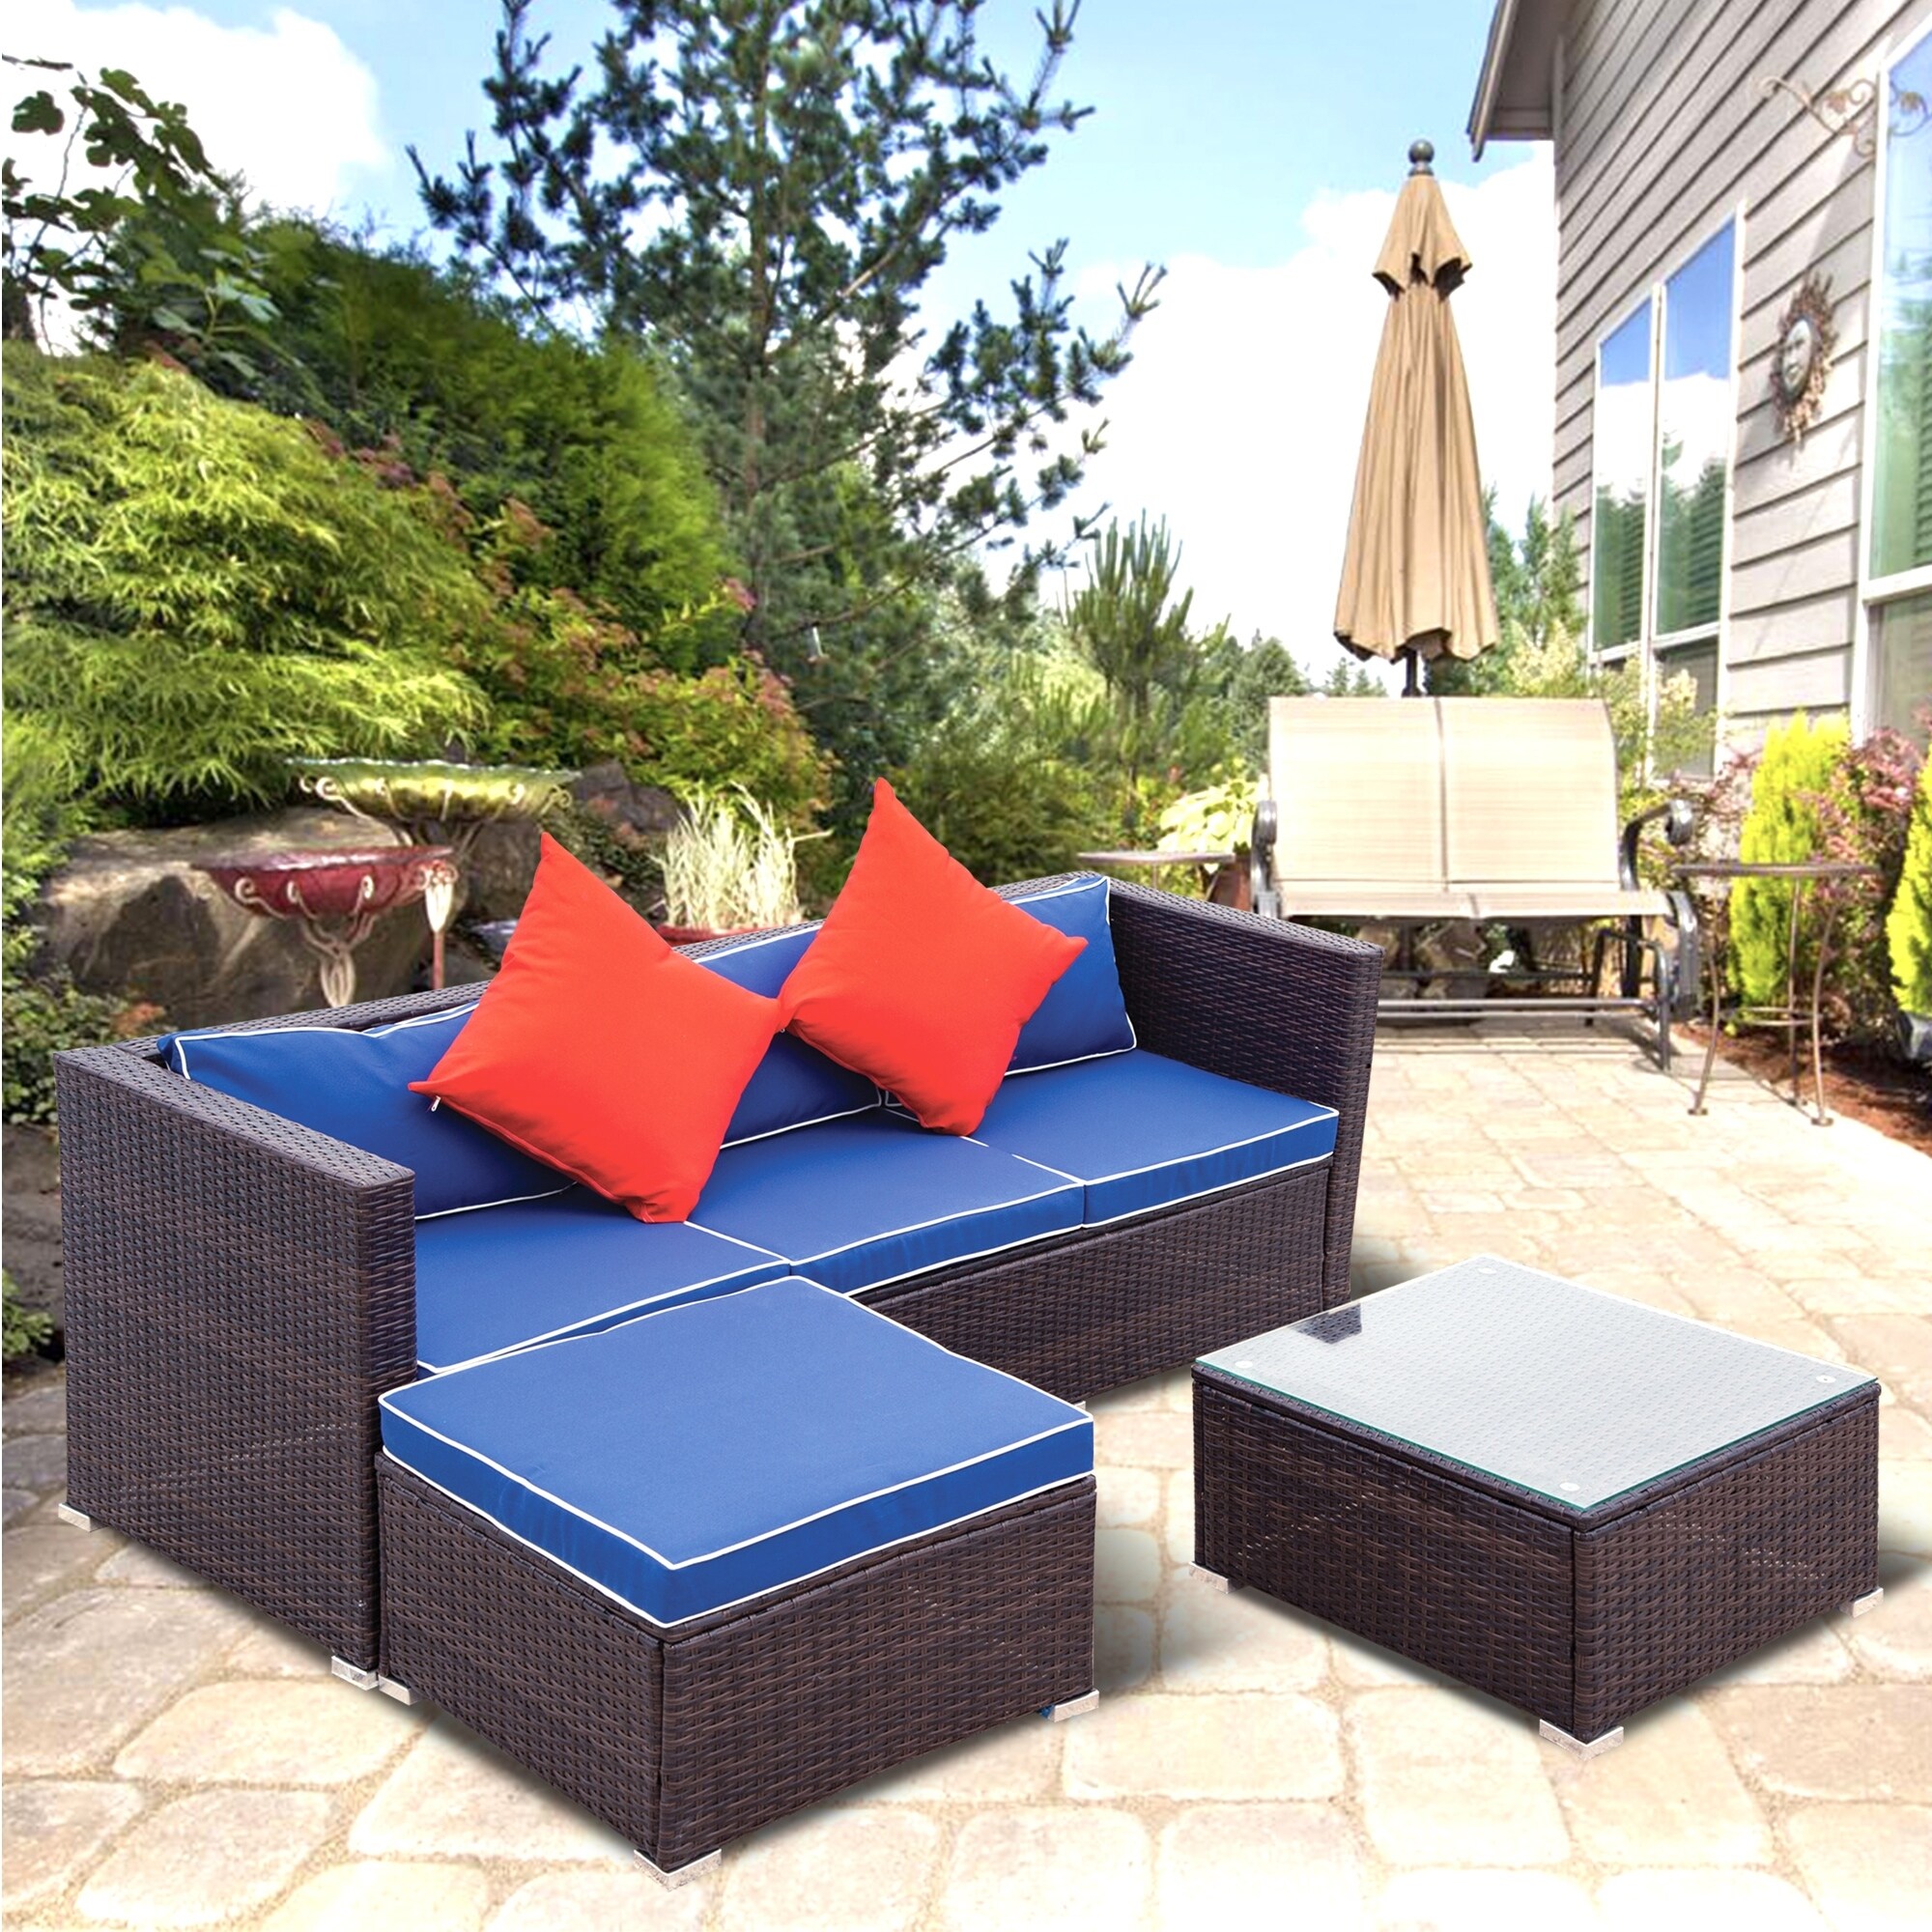 3-piece Pe Wicker Sectional Patio Set For 3-4  Ideal For Indoor Or Outdoor Relaxation.